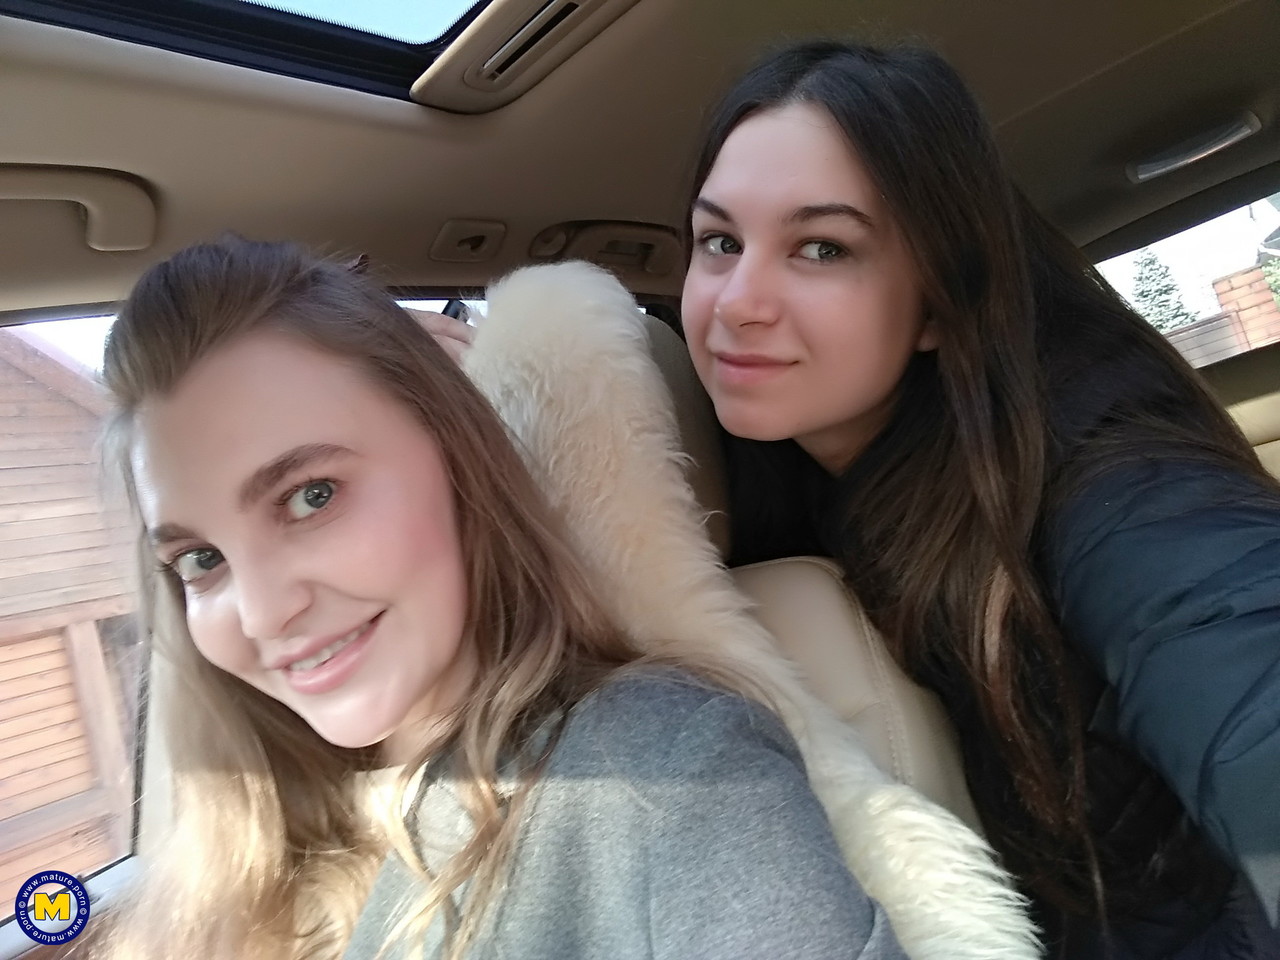 Long haired European lovers take a selfie in the car before lesbian sex action porno fotky #427416561 | Mature NL Pics, Polina, Tamara, Selfie, mobilní porno